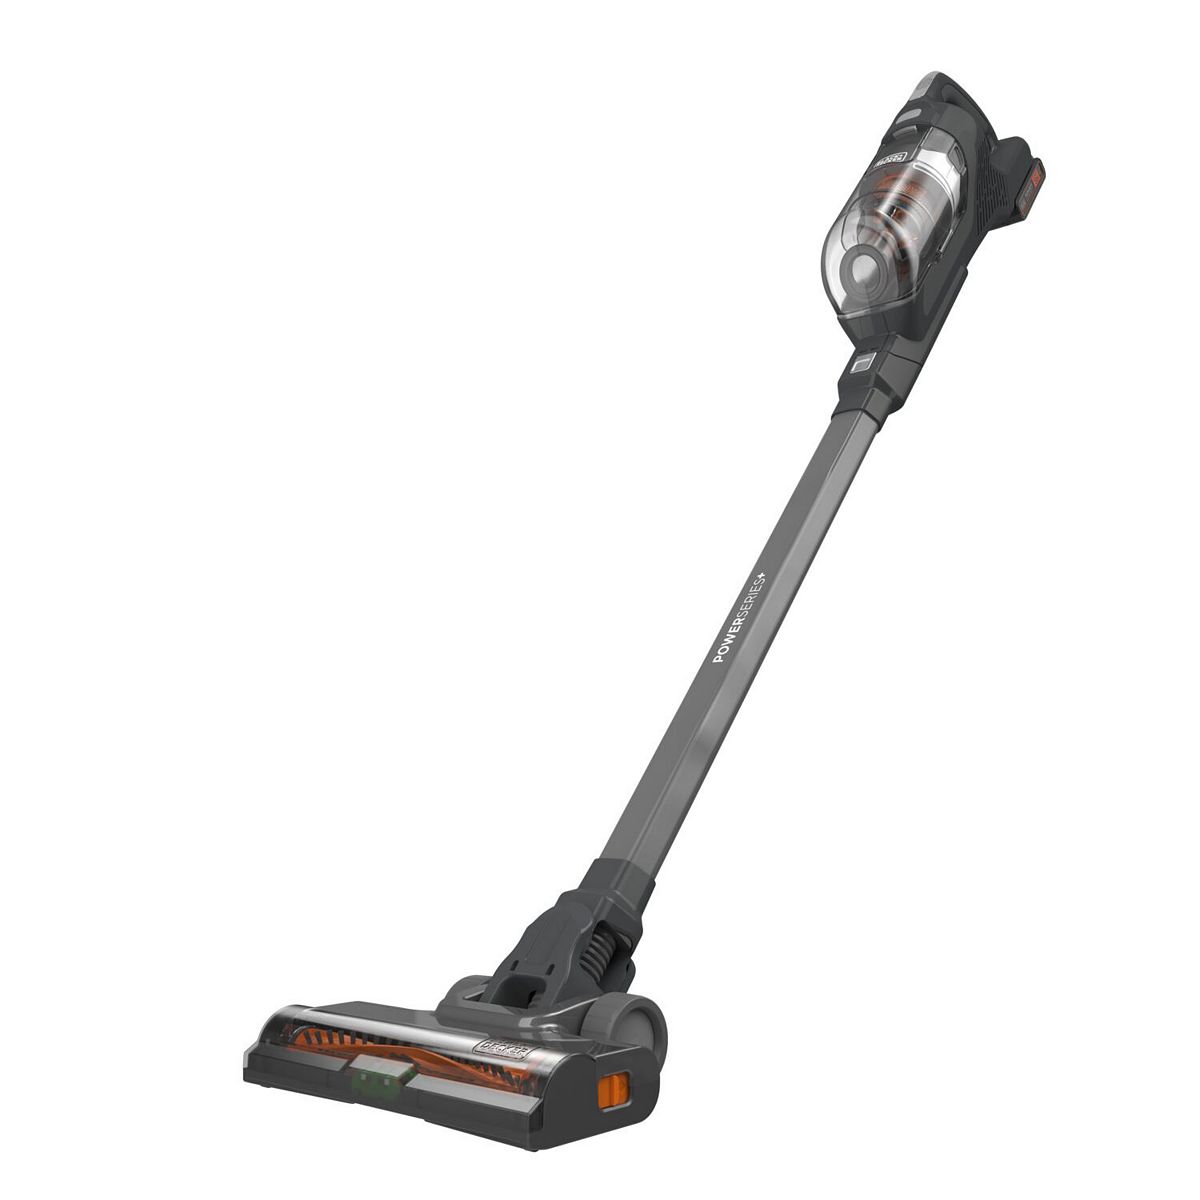 BLACK+DECKER Powerseries Cordless Max Stick Vacuum w/ 20V Removable Battery, Crevice Tool & 2 Washable Filters $103 + $20 Kohl's Cash + Free Shipping